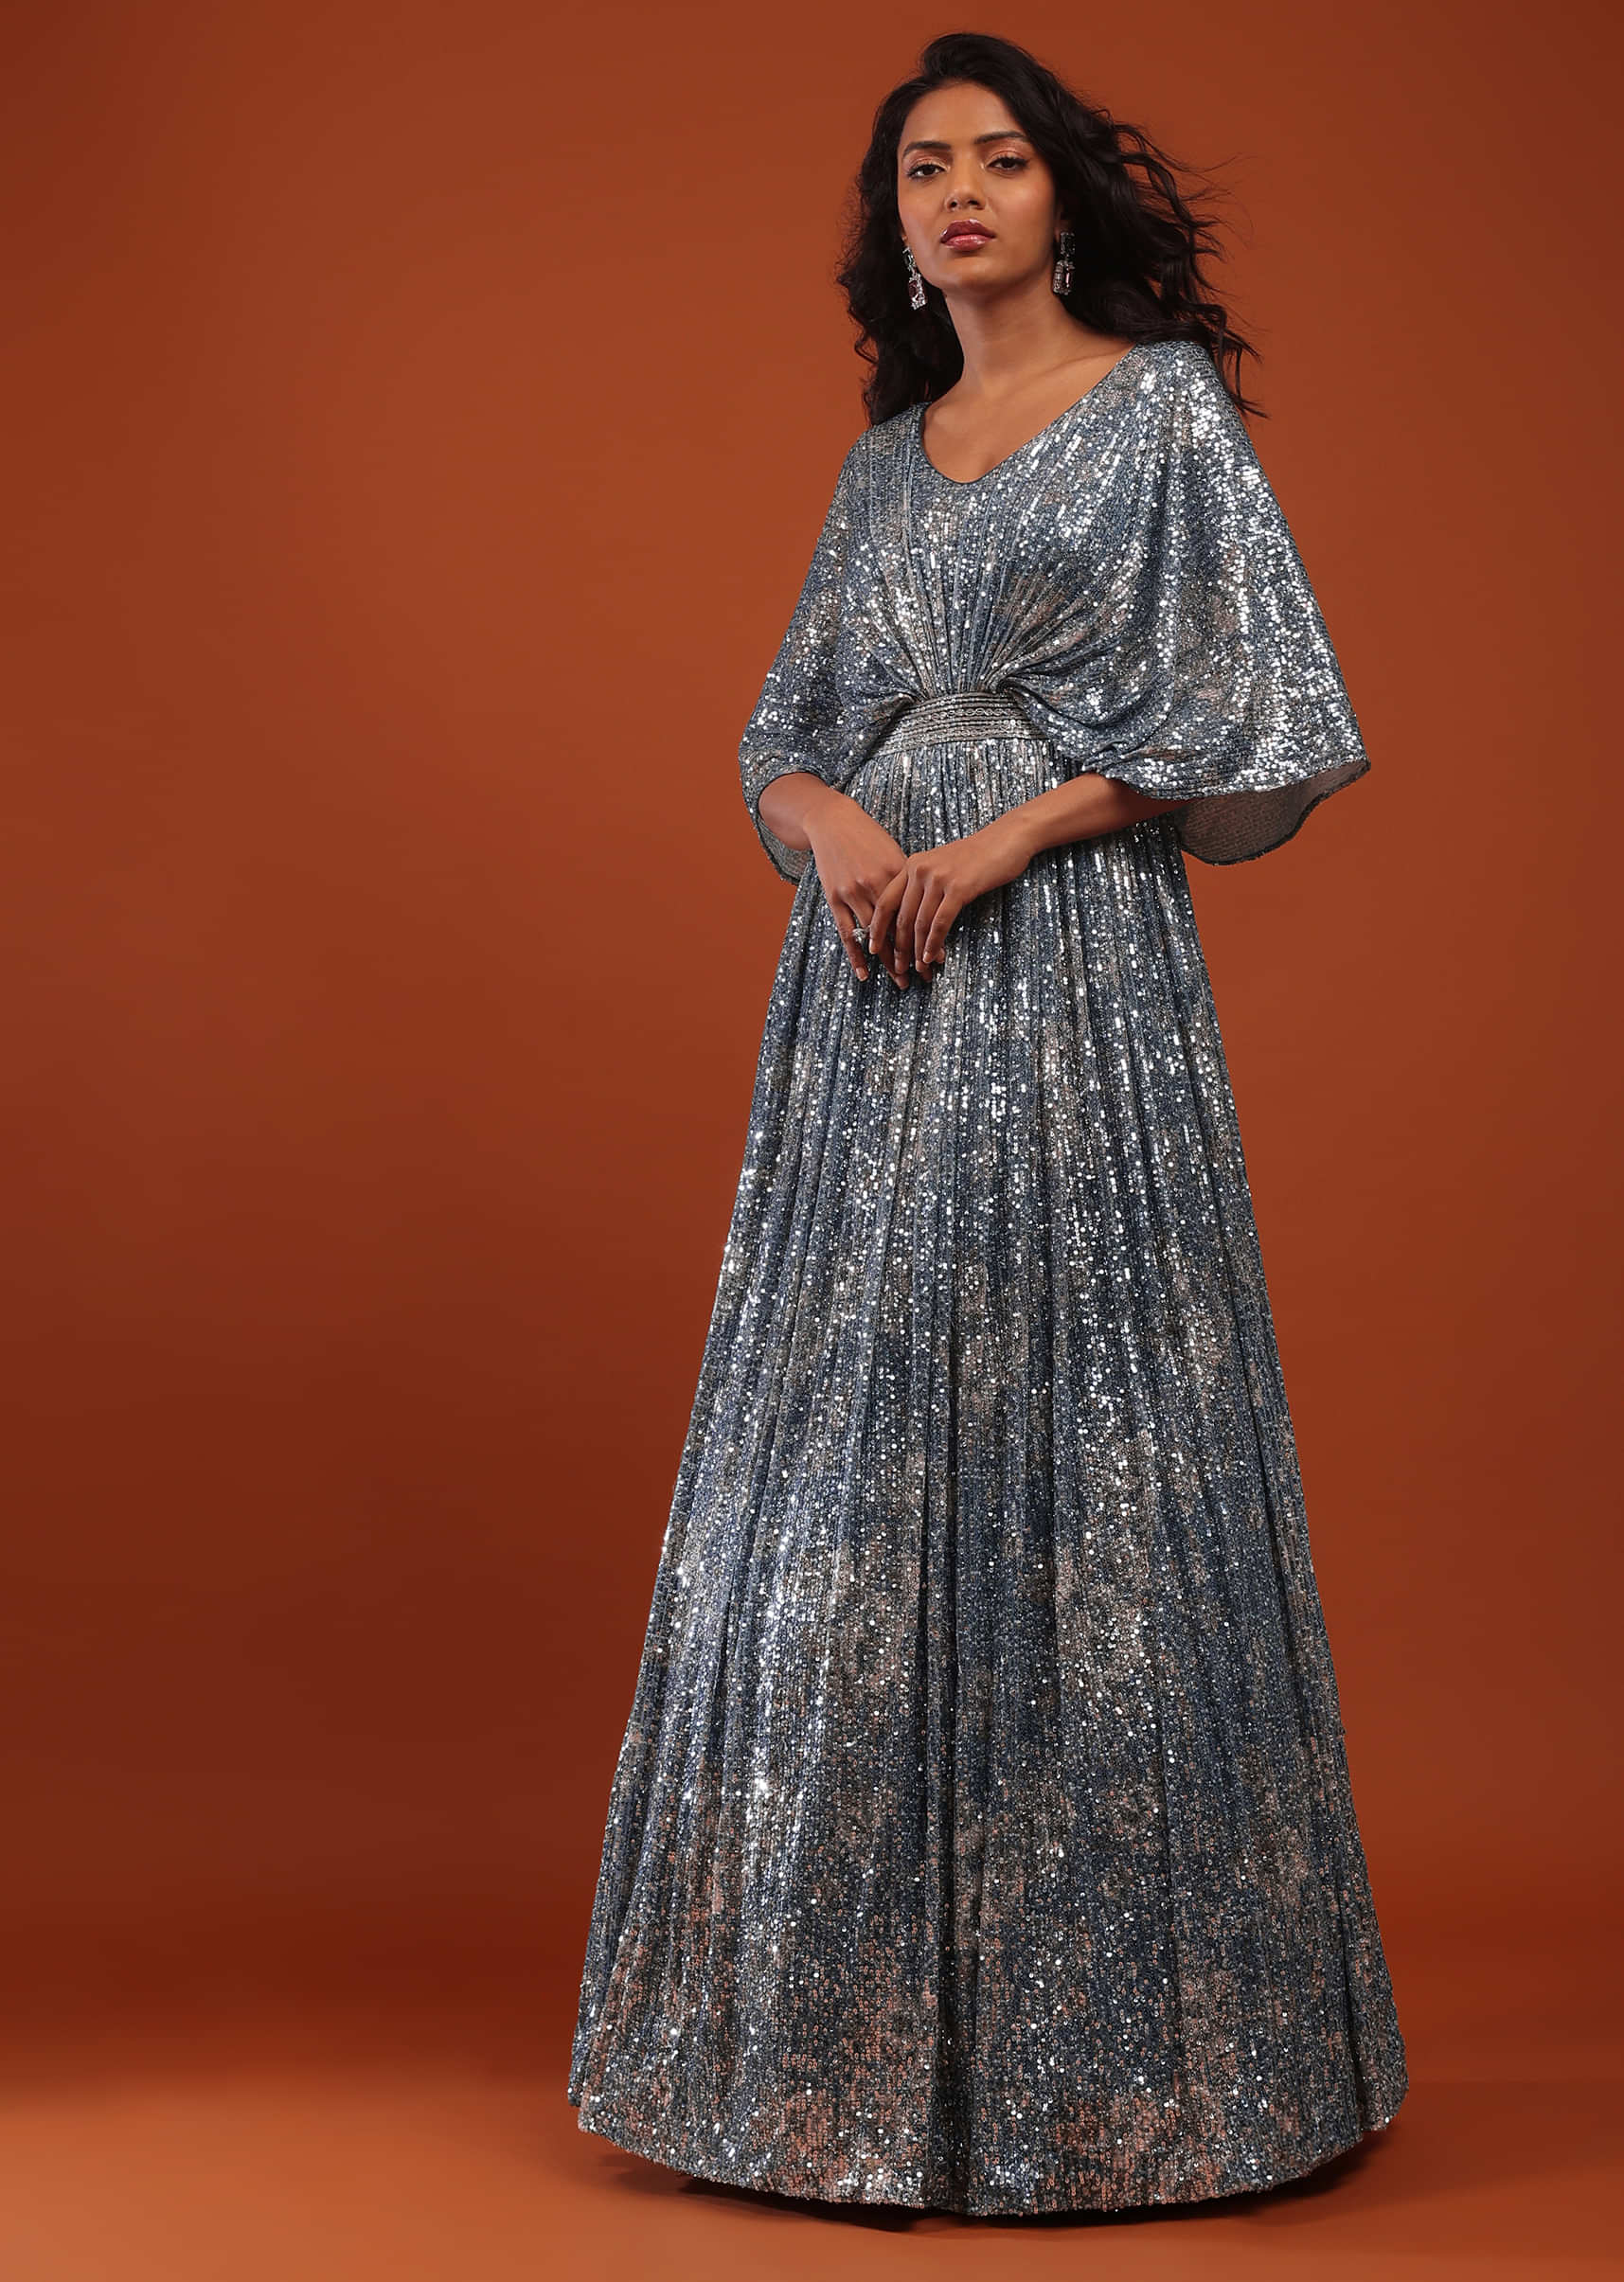 Allure Blue Crushed Sequins Kaftan Gown With An Embellished Waistbelt